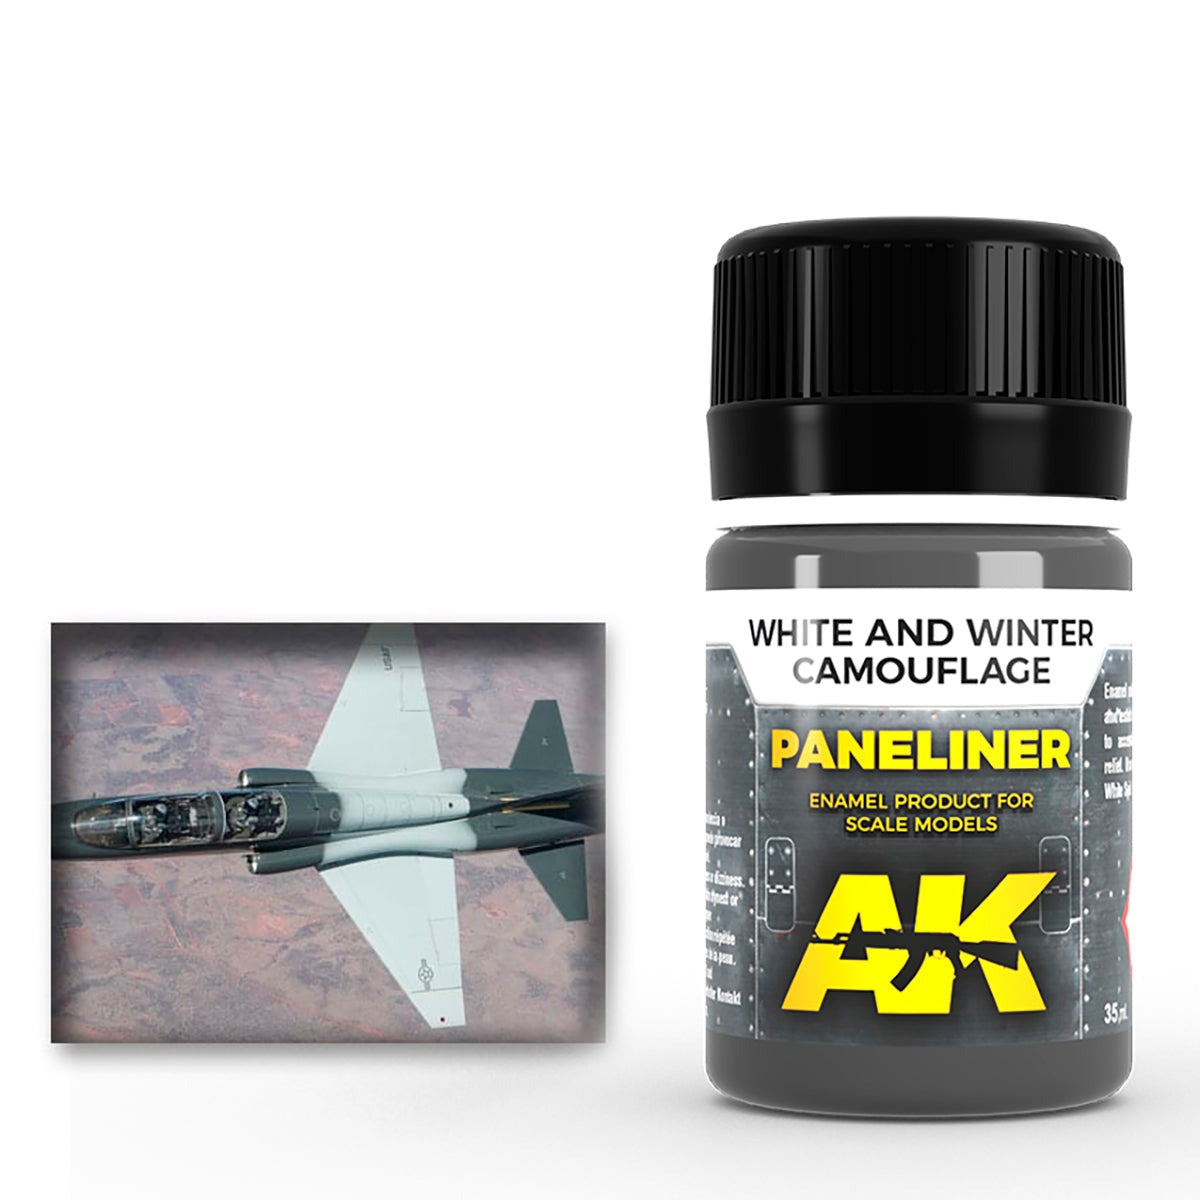 Paneliner for White and Winter Camouflage 35ml - Loaded Dice